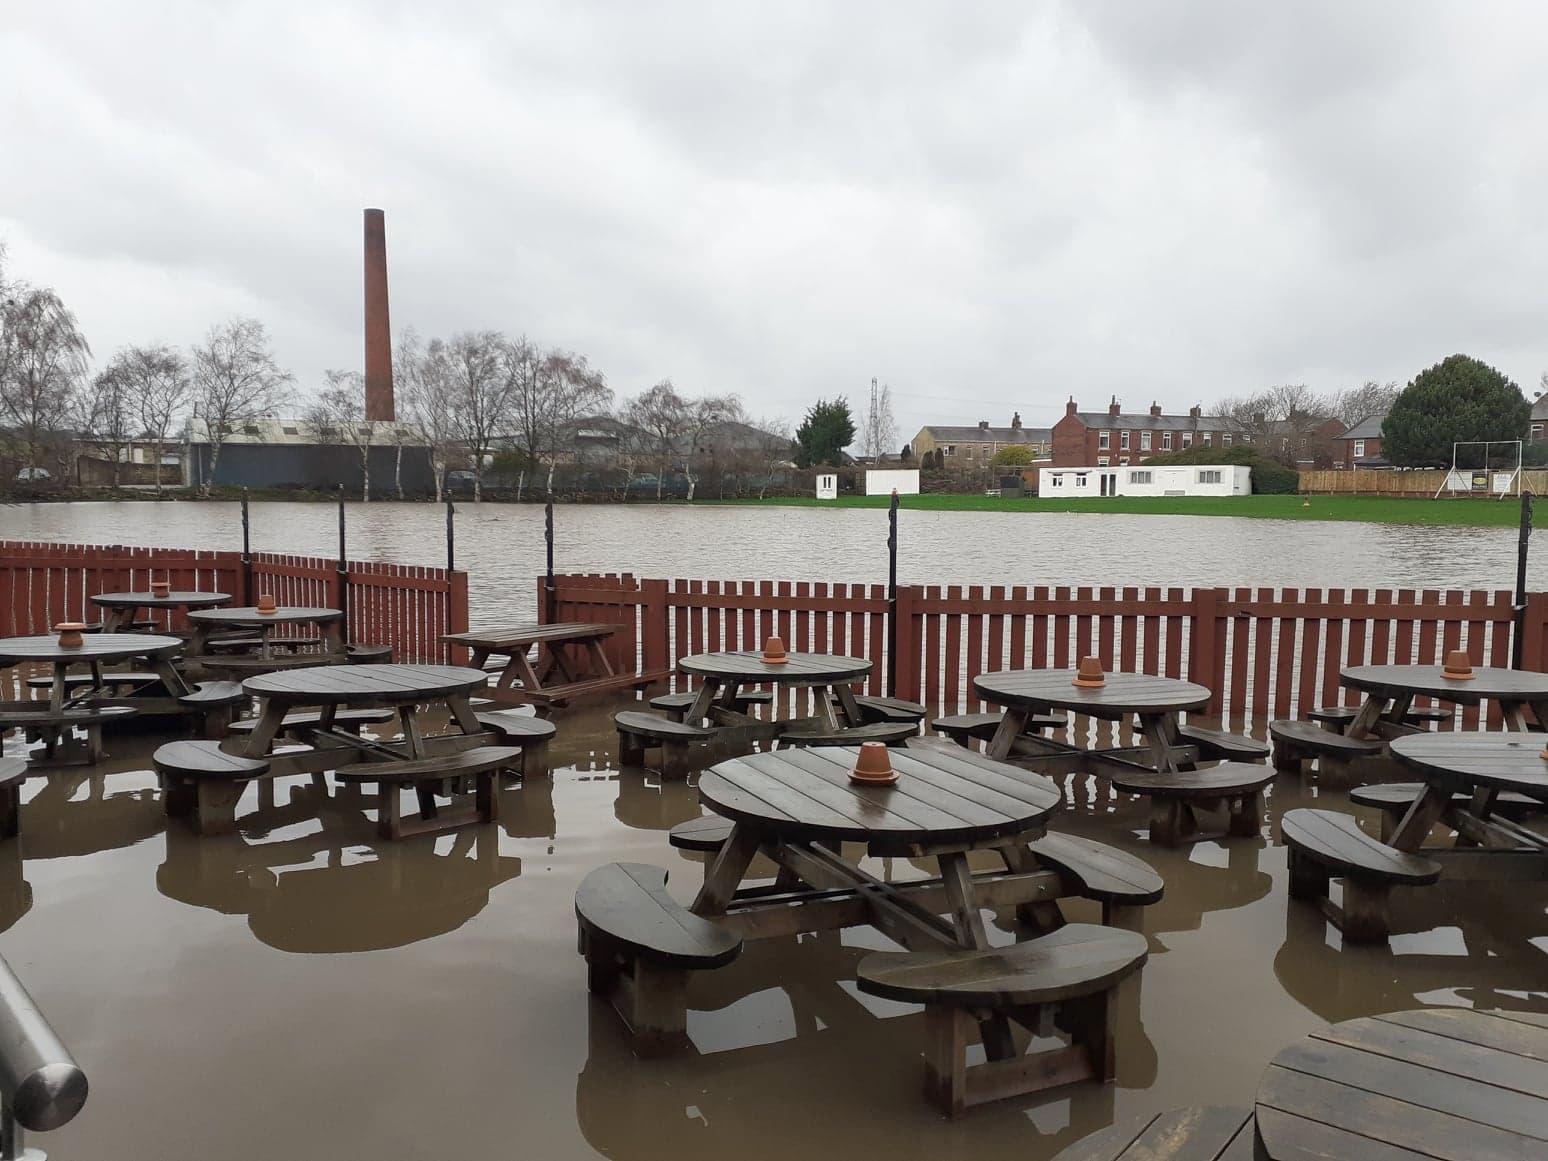 In Horbury Bridge, the river did its worst. At the Horse and Jockey, only fence and furnishings distinguished this pub garden from the nearby river.